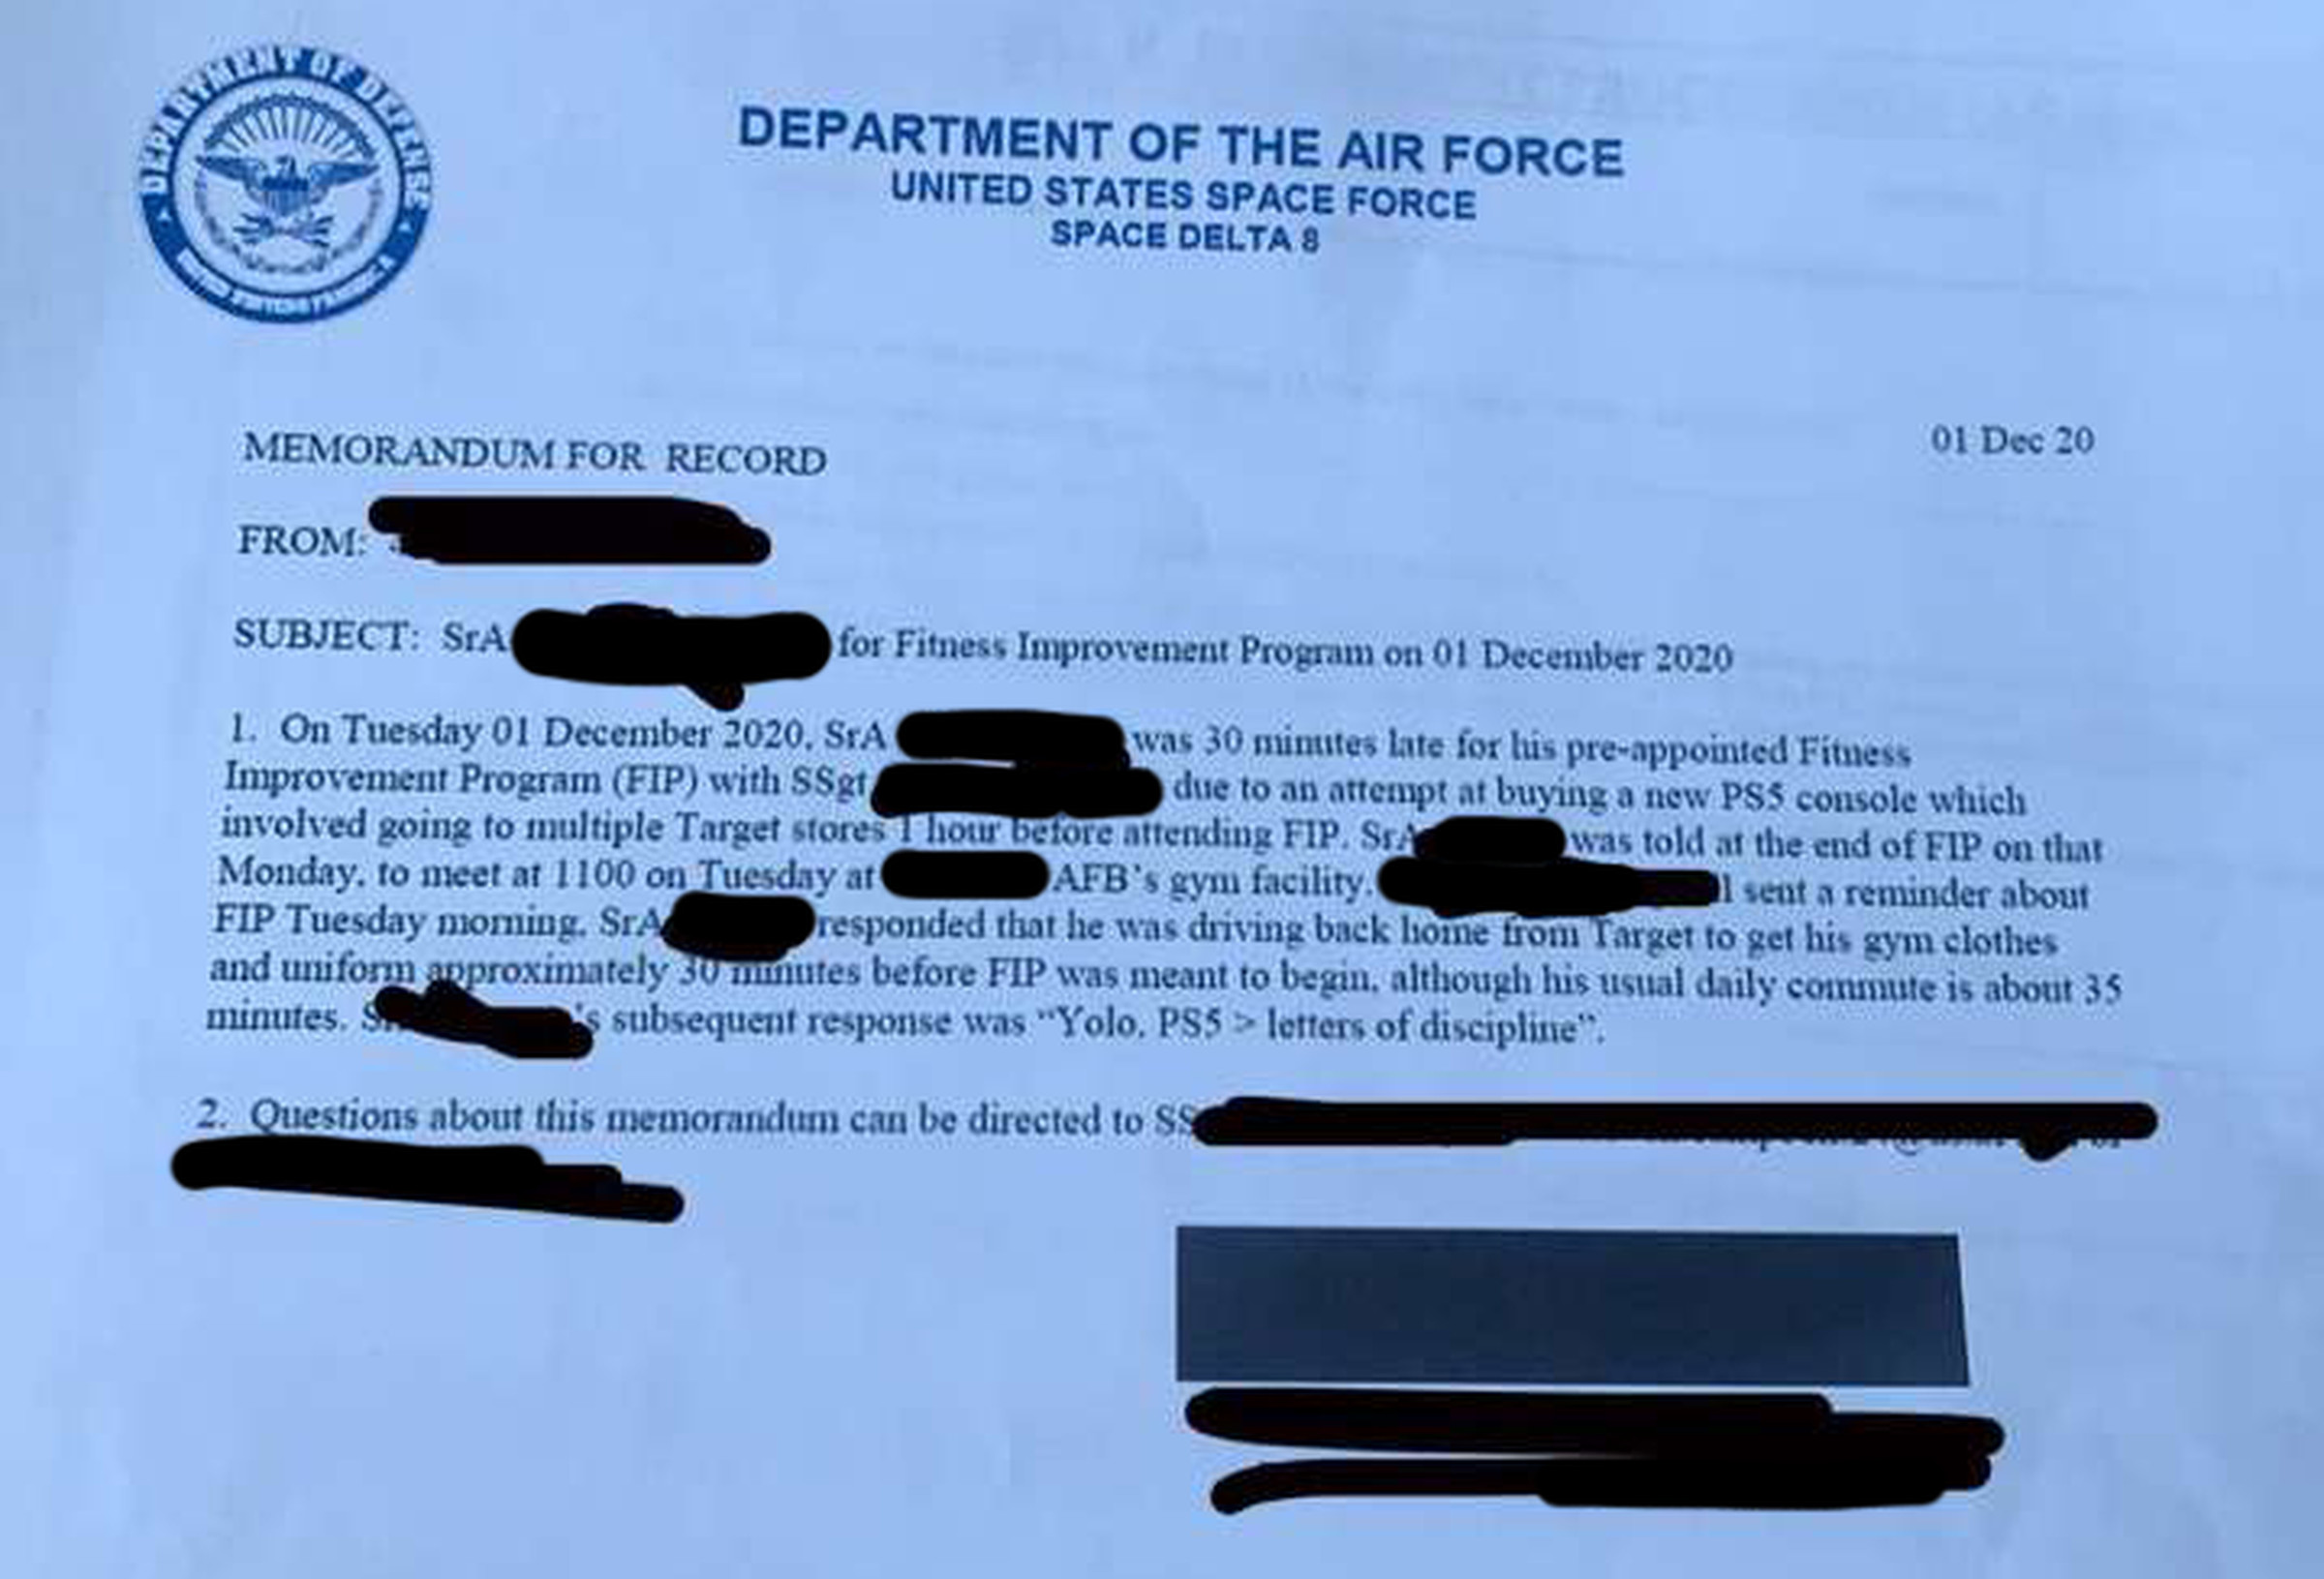 A letter of reprimand from the Space Force